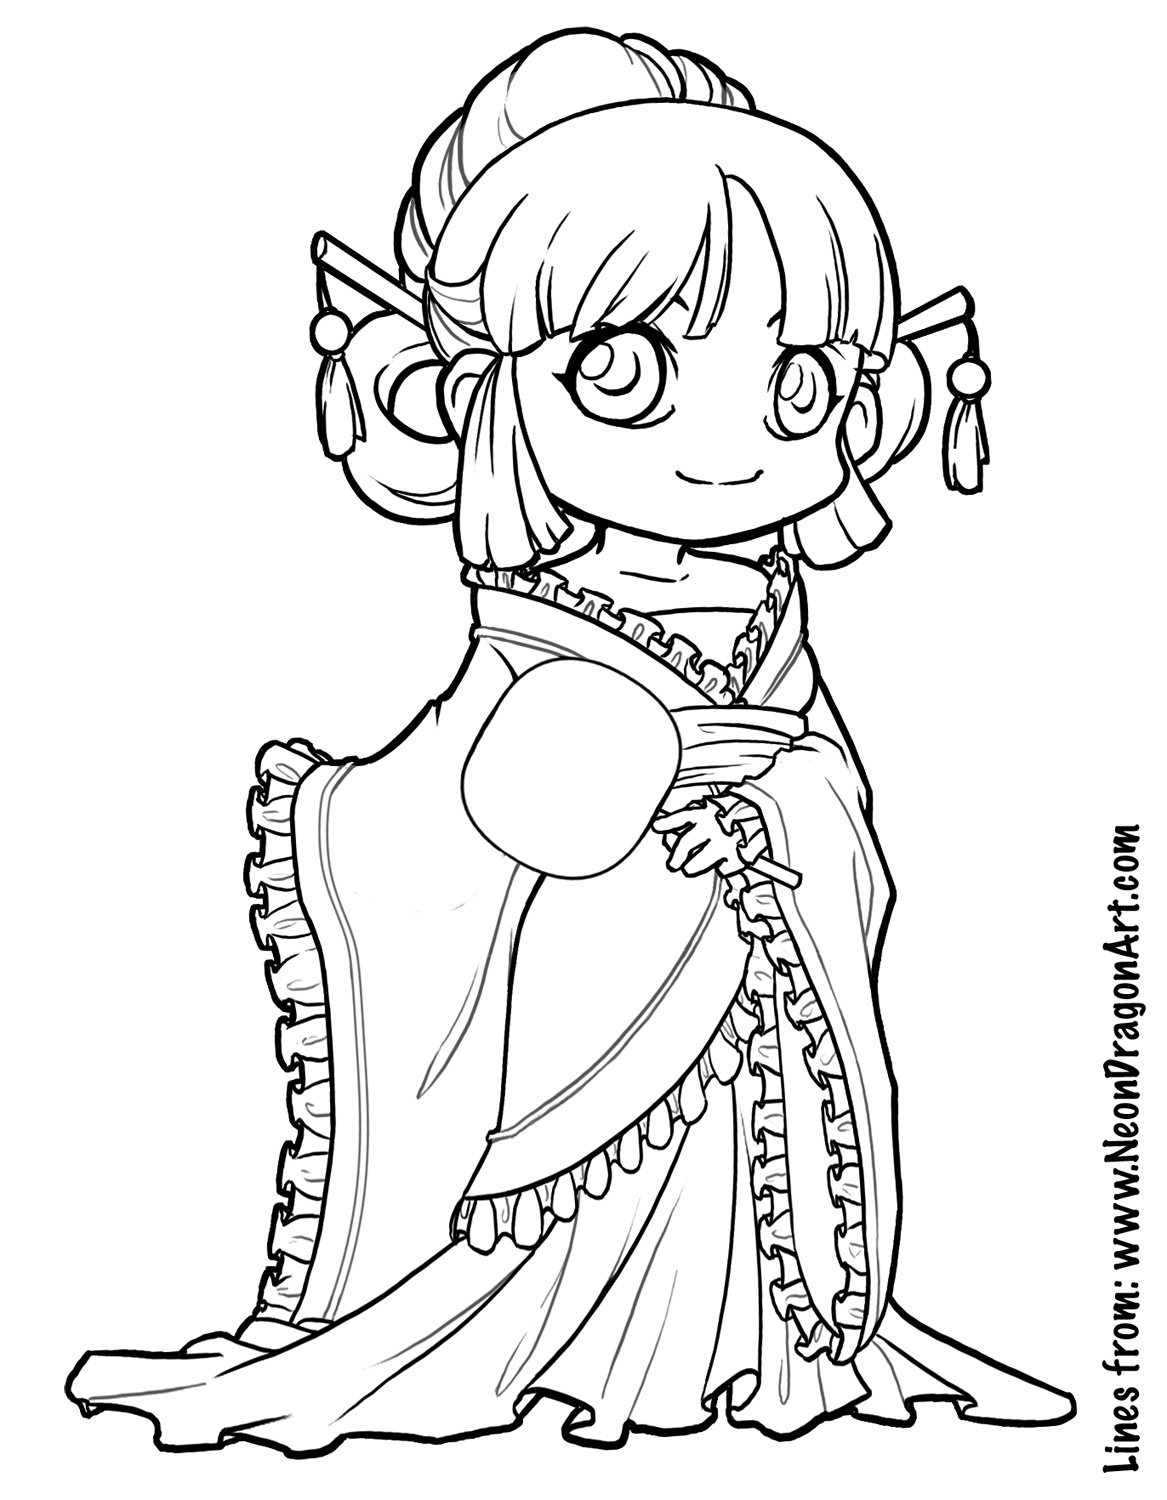 Anime Coloring Pages Games at GetColorings.com | Free printable